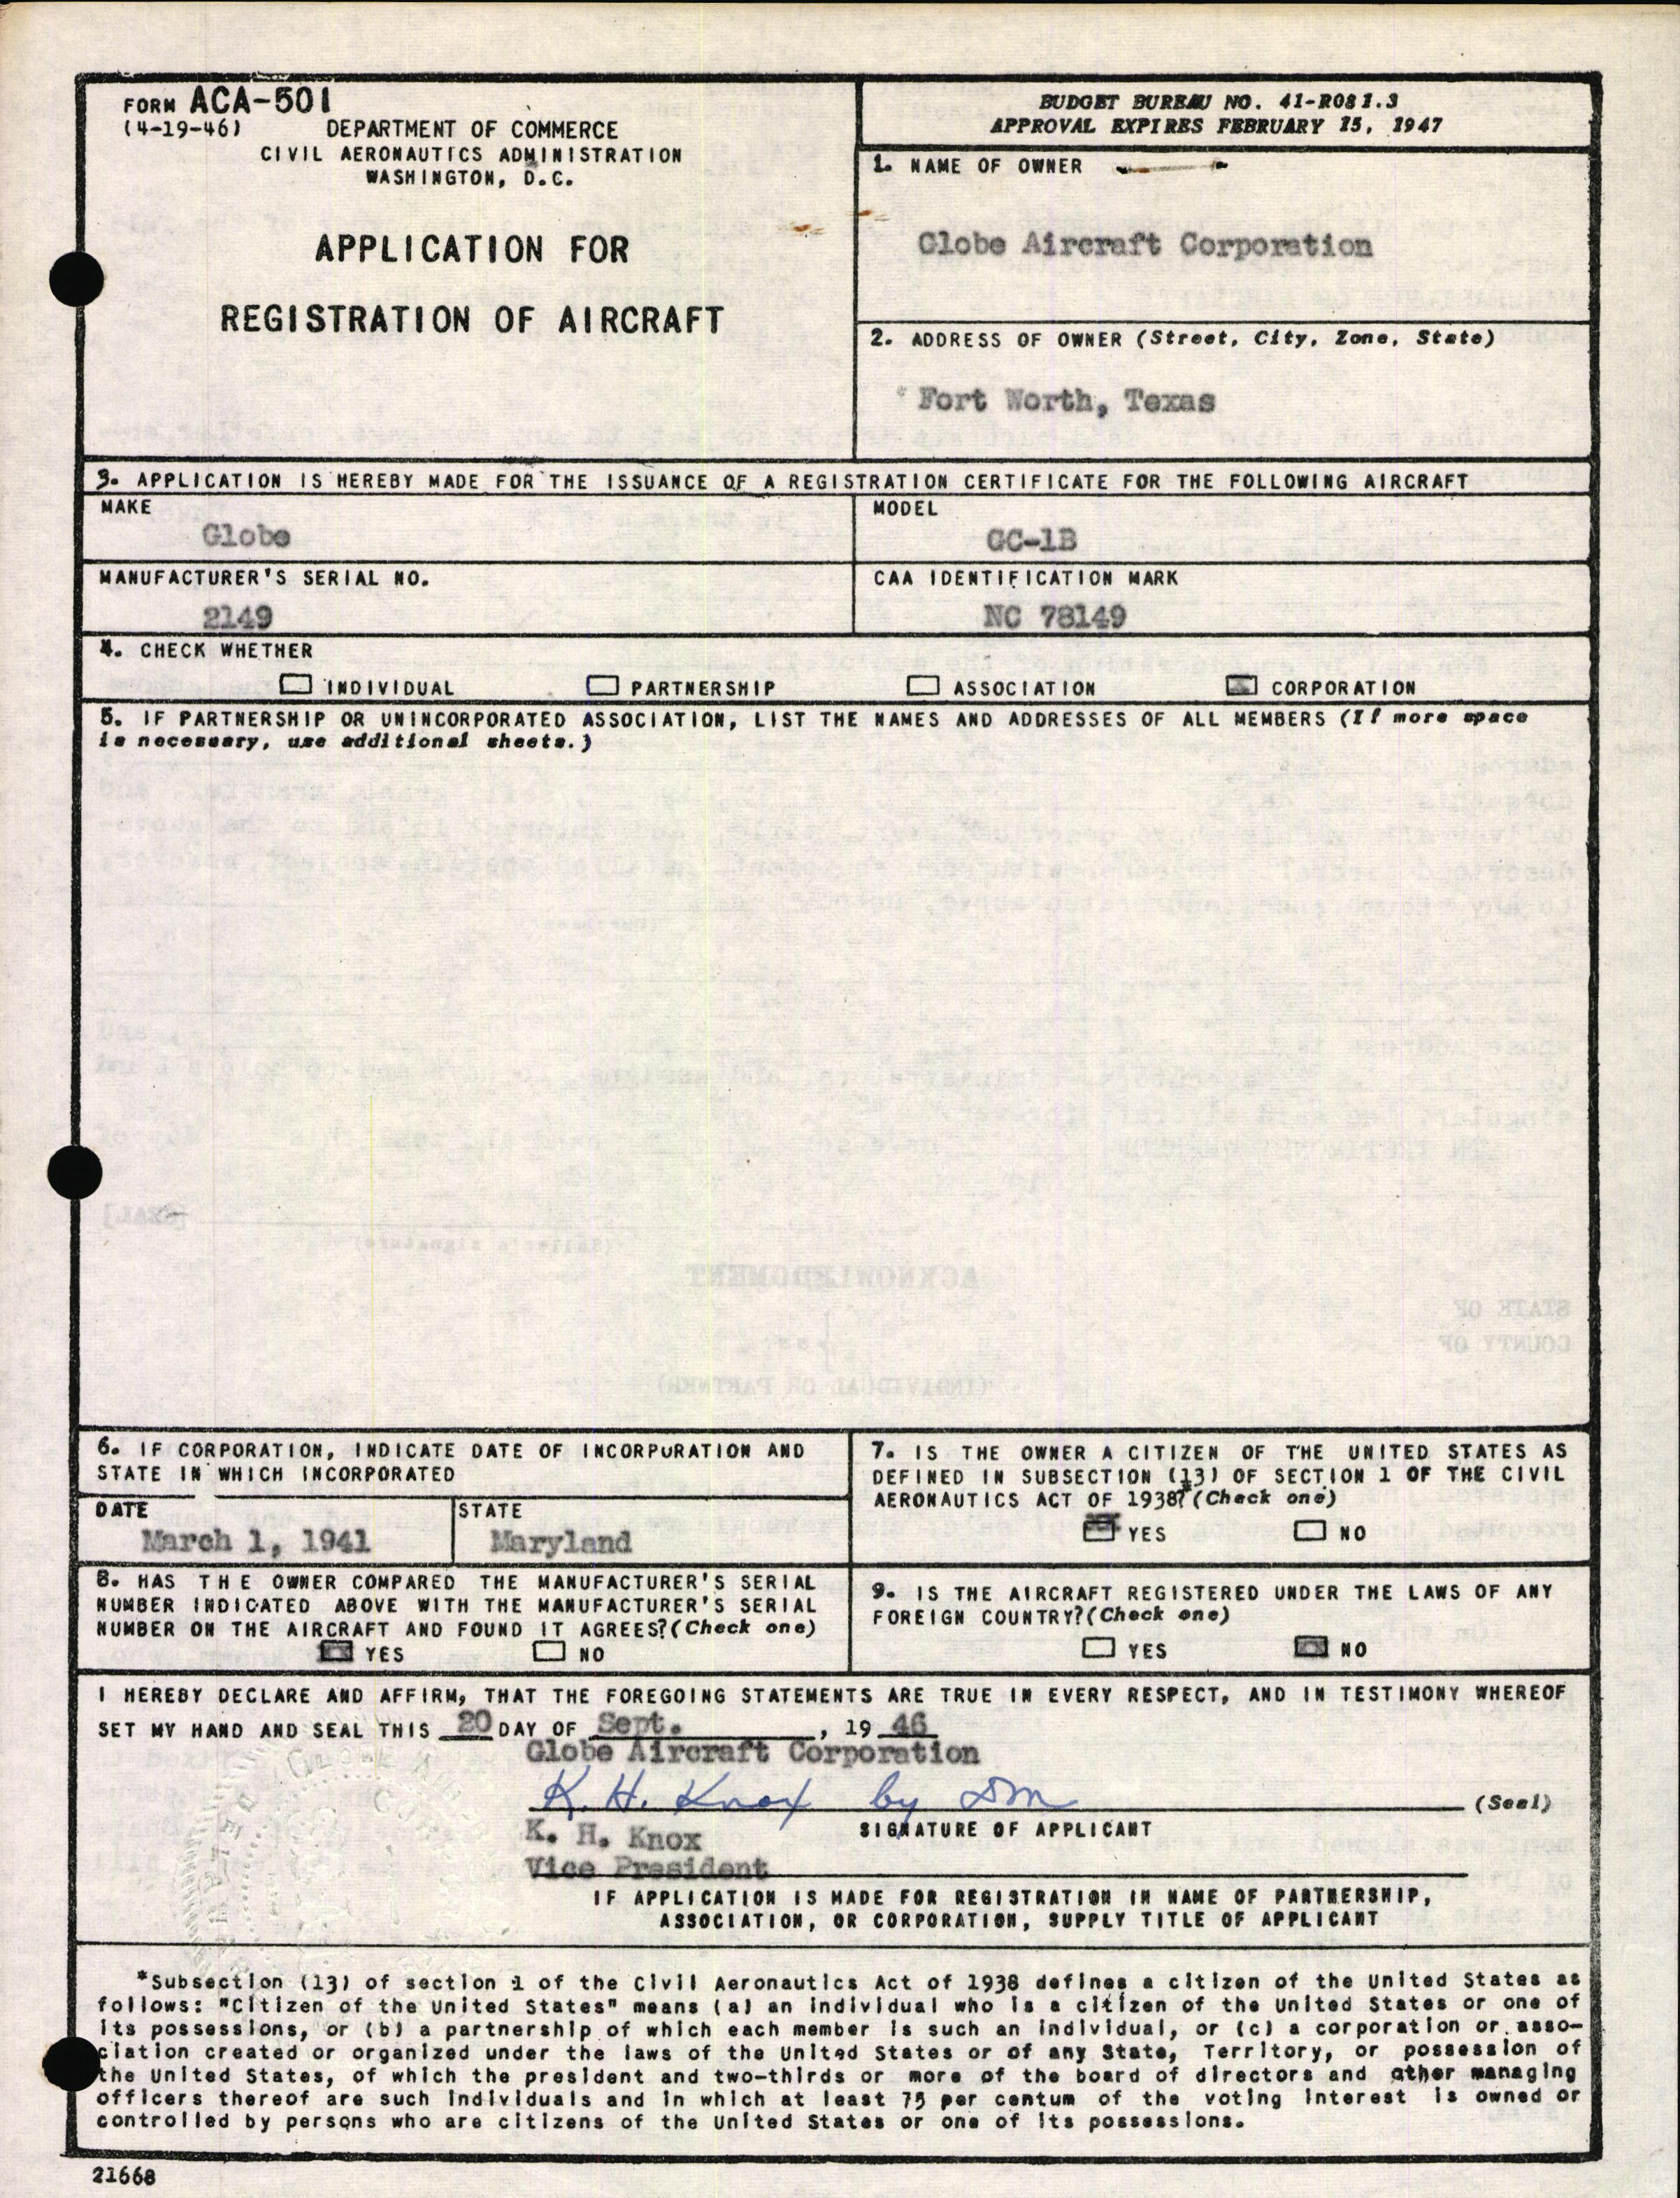 Sample page 1 from AirCorps Library document: Technical Information for Serial Number 2149